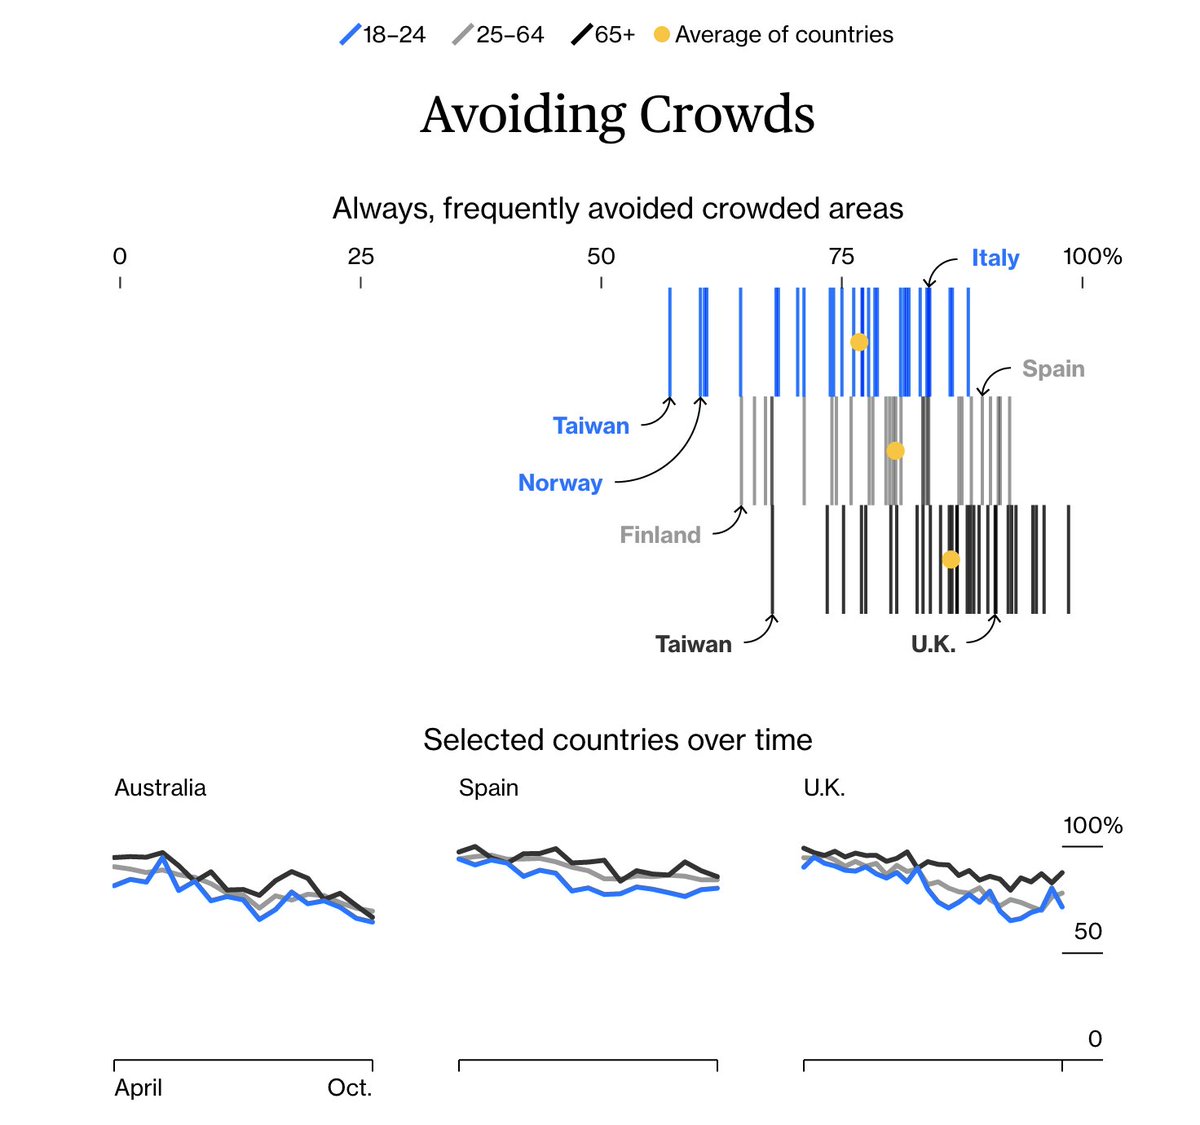 The majority of young people told pollsters they’ve tried to avoid crowds during the pandemic, more than commonly imagined.While their overall average lags older age groups, their changes in attitude broadly track those seen in other generations  http://trib.al/4goZL4Z 